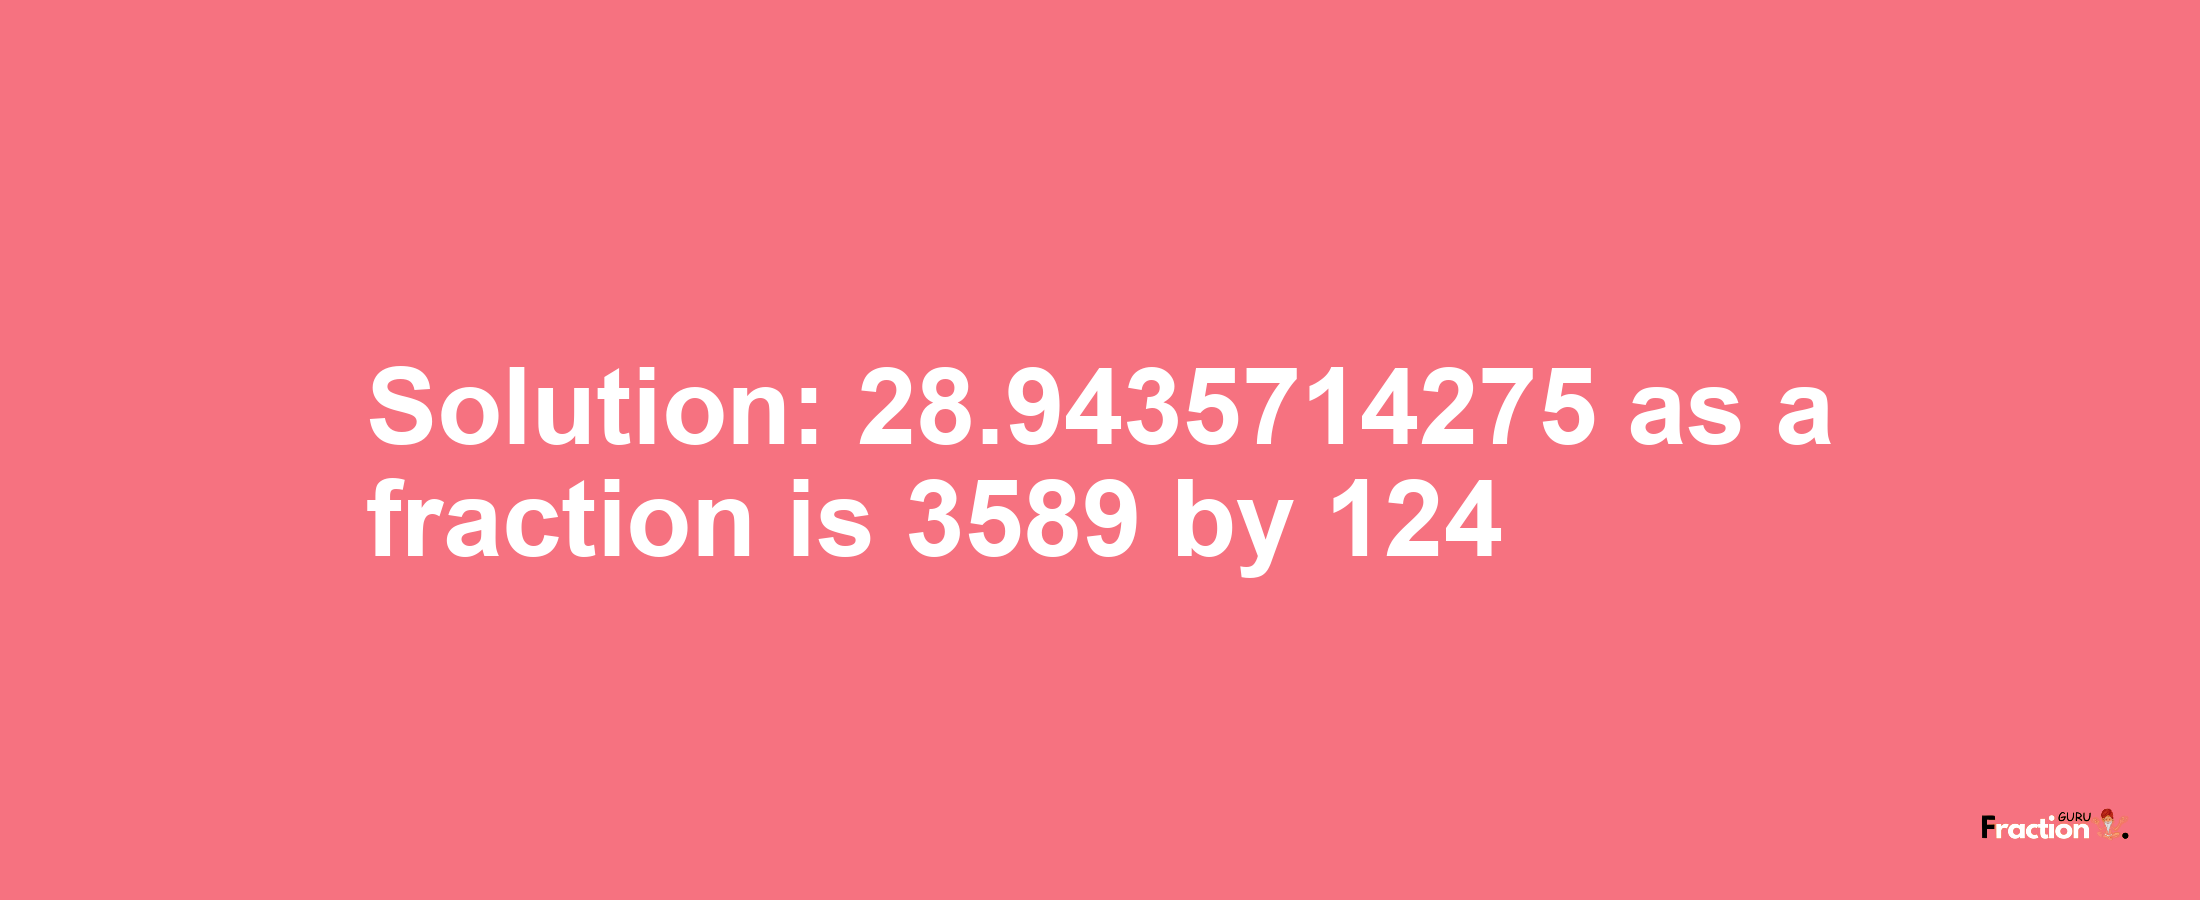 Solution:28.9435714275 as a fraction is 3589/124